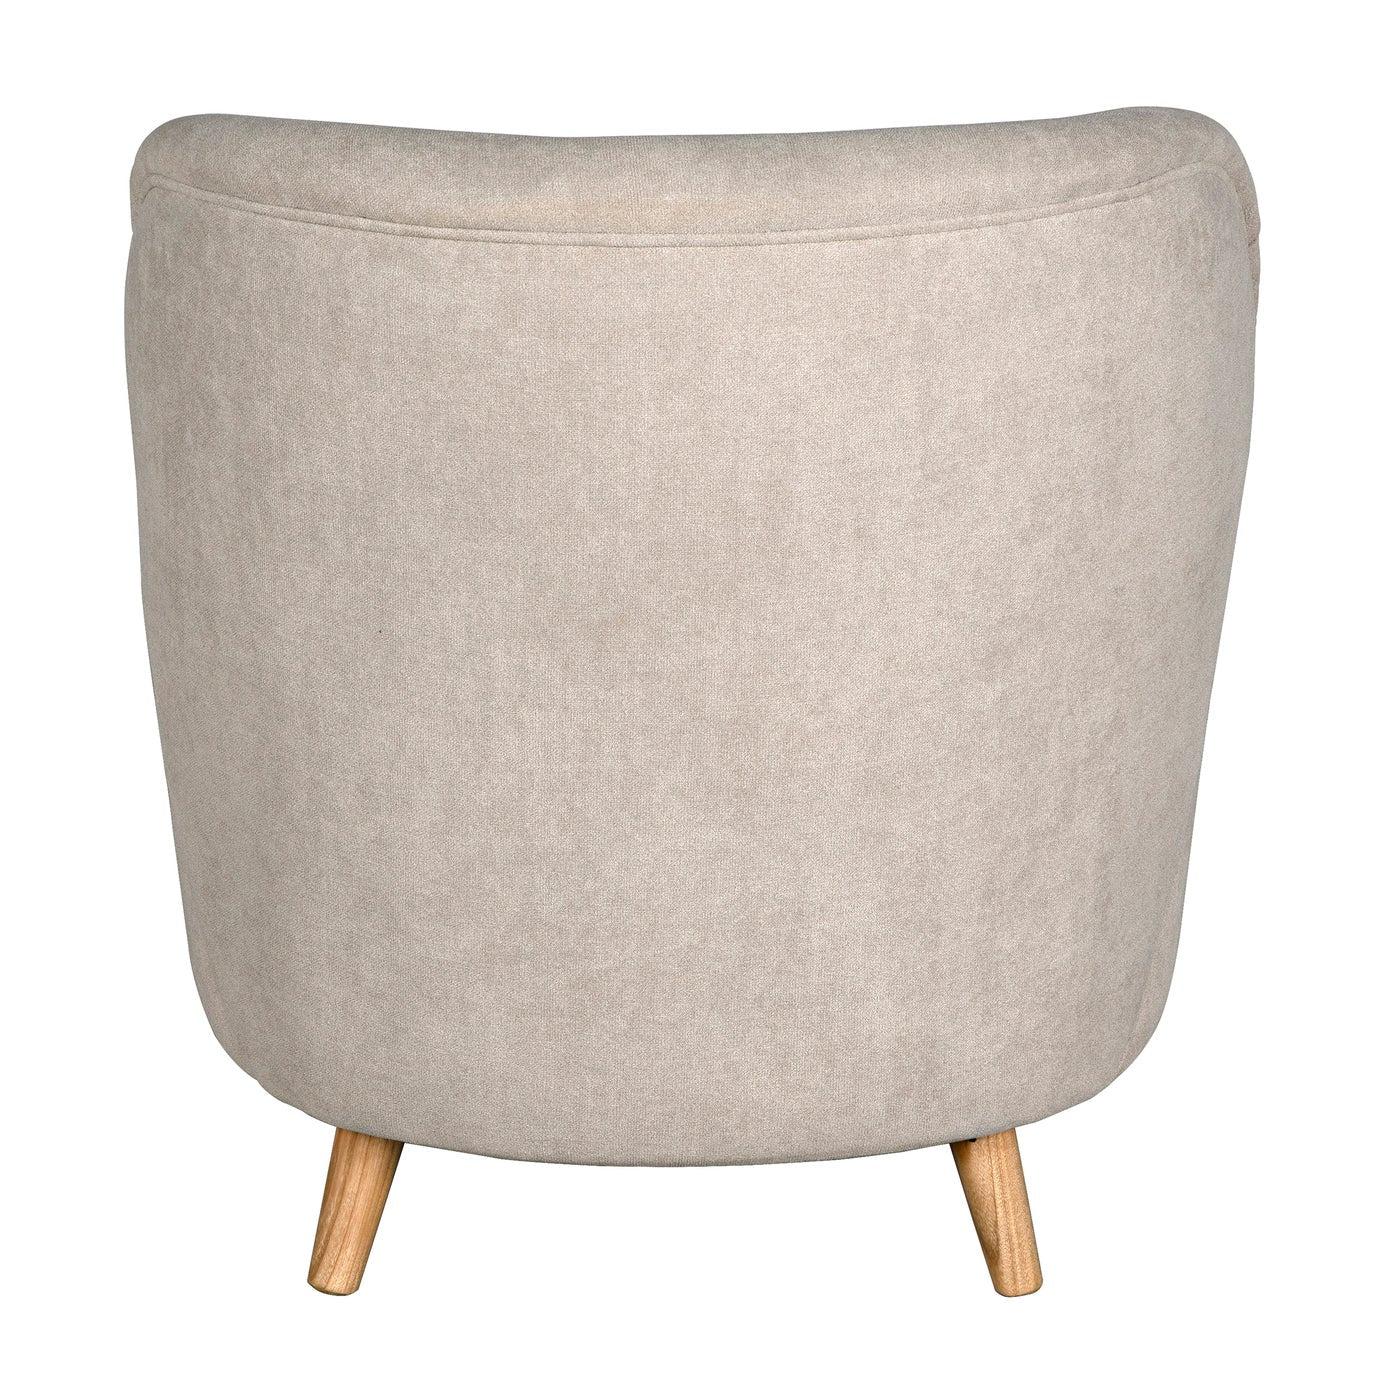 Laffont Chair with Wheat Fabric